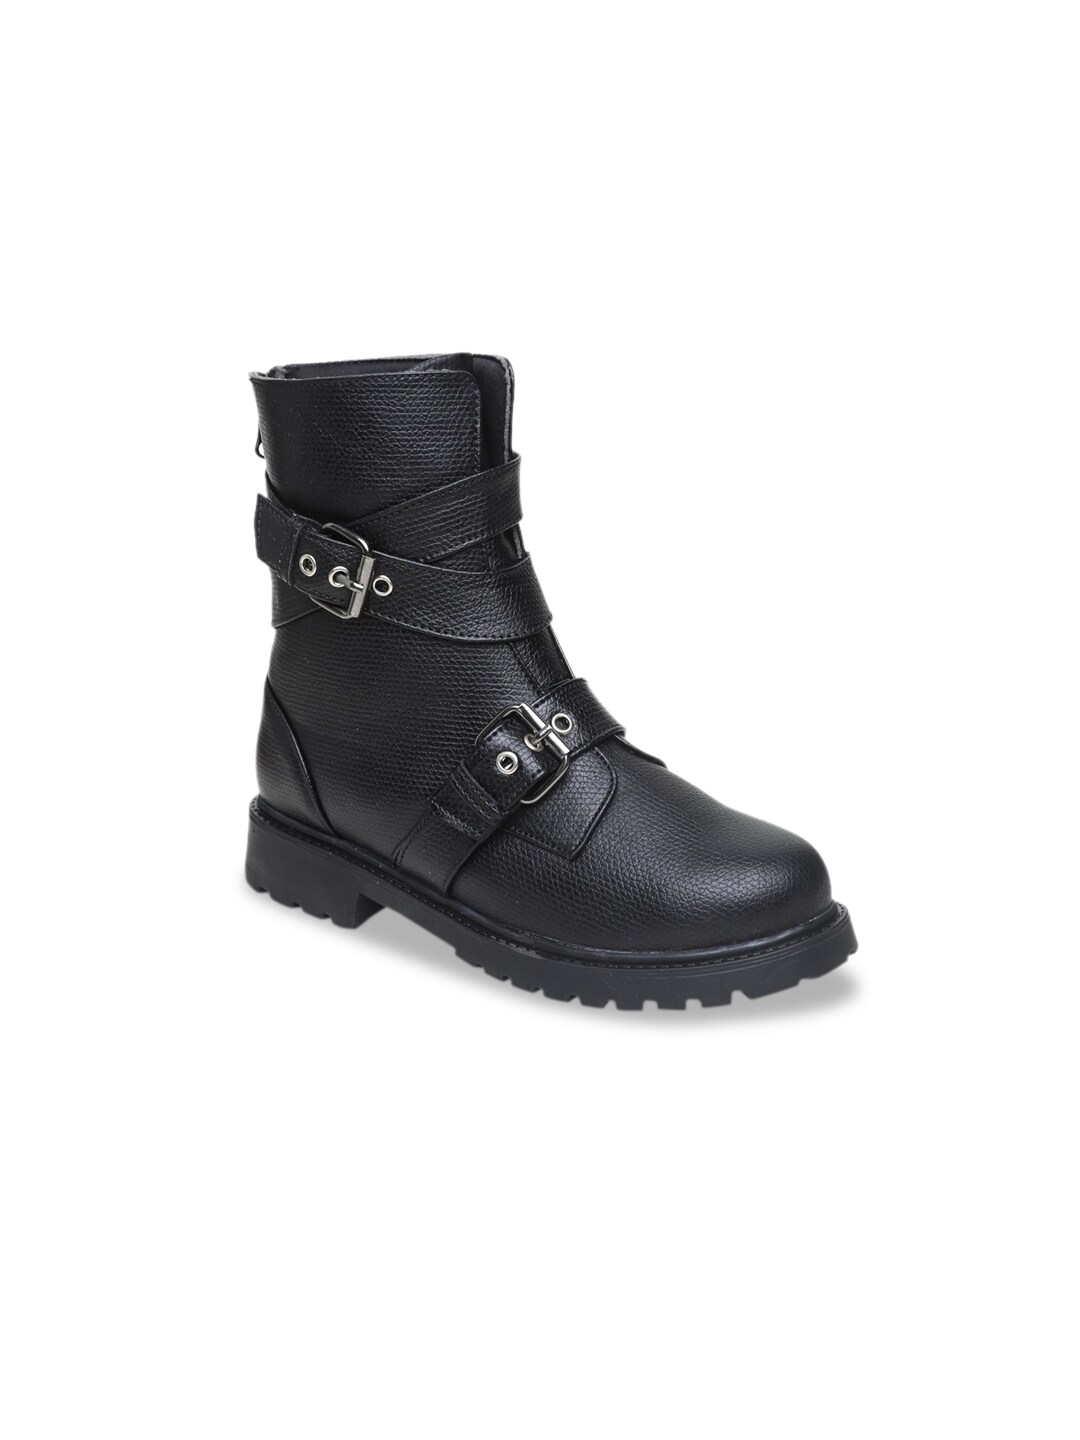 VALIOSAA Black Textured High-Top Block Heeled Boots with Buckles Price in India